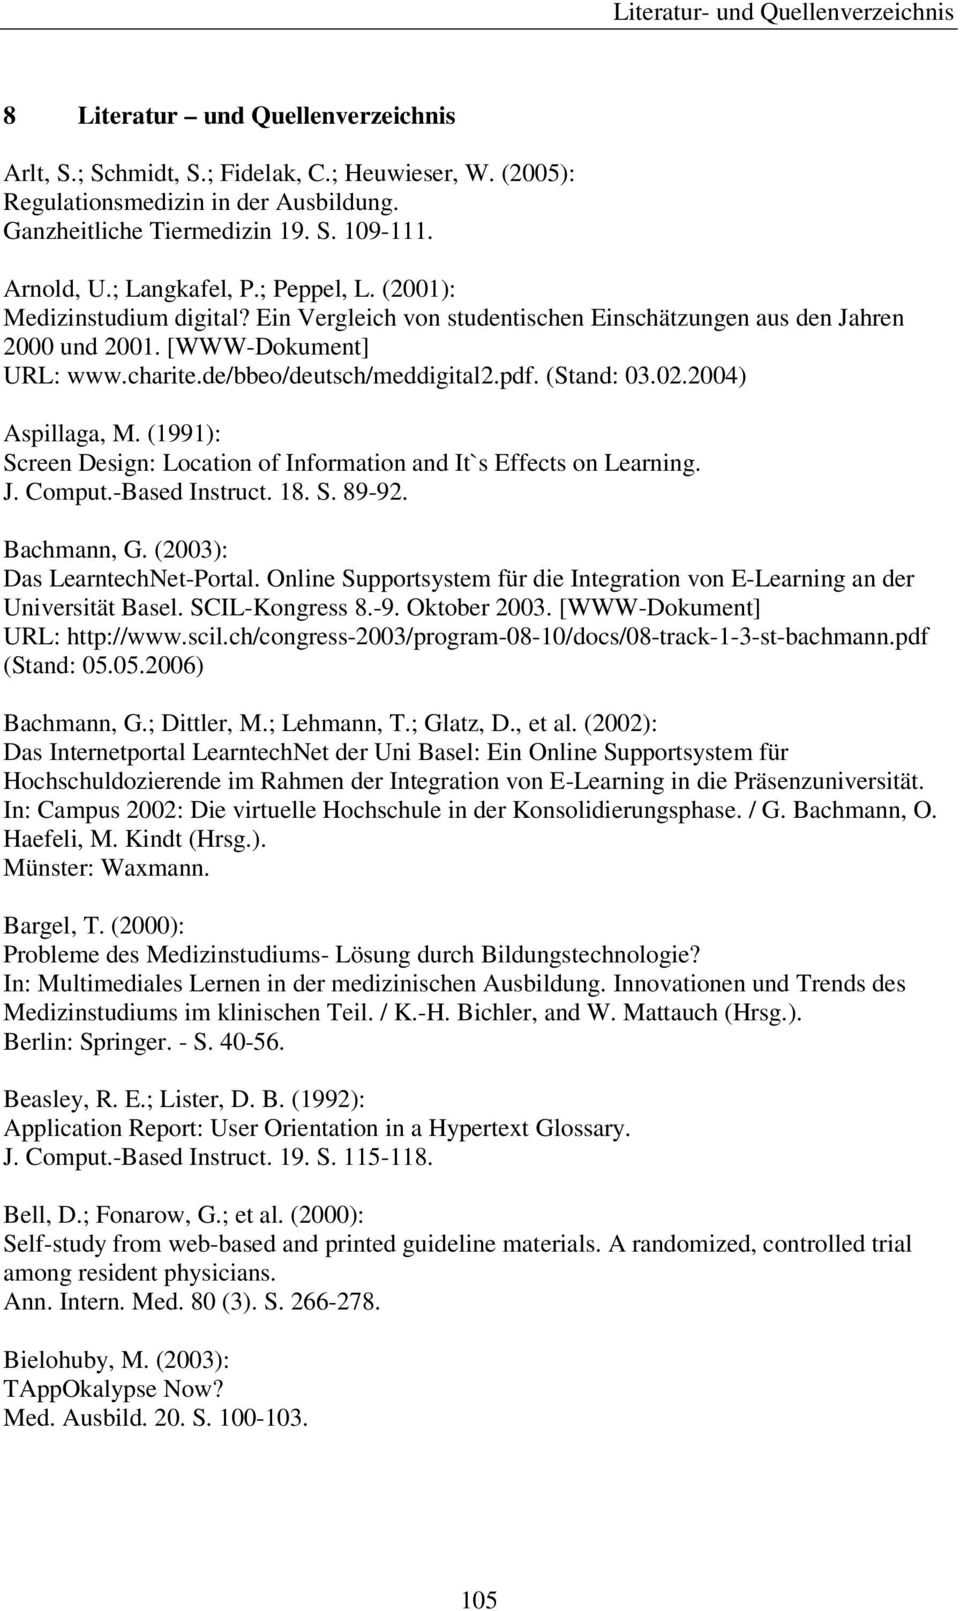 02.2004) Aspillaga, M. (1991): Screen Design: Location of Information and It`s Effects on Learning. J. Comput.-Based Instruct. 18. S. 89-92. Bachmann, G. (2003): Das LearntechNet-Portal.